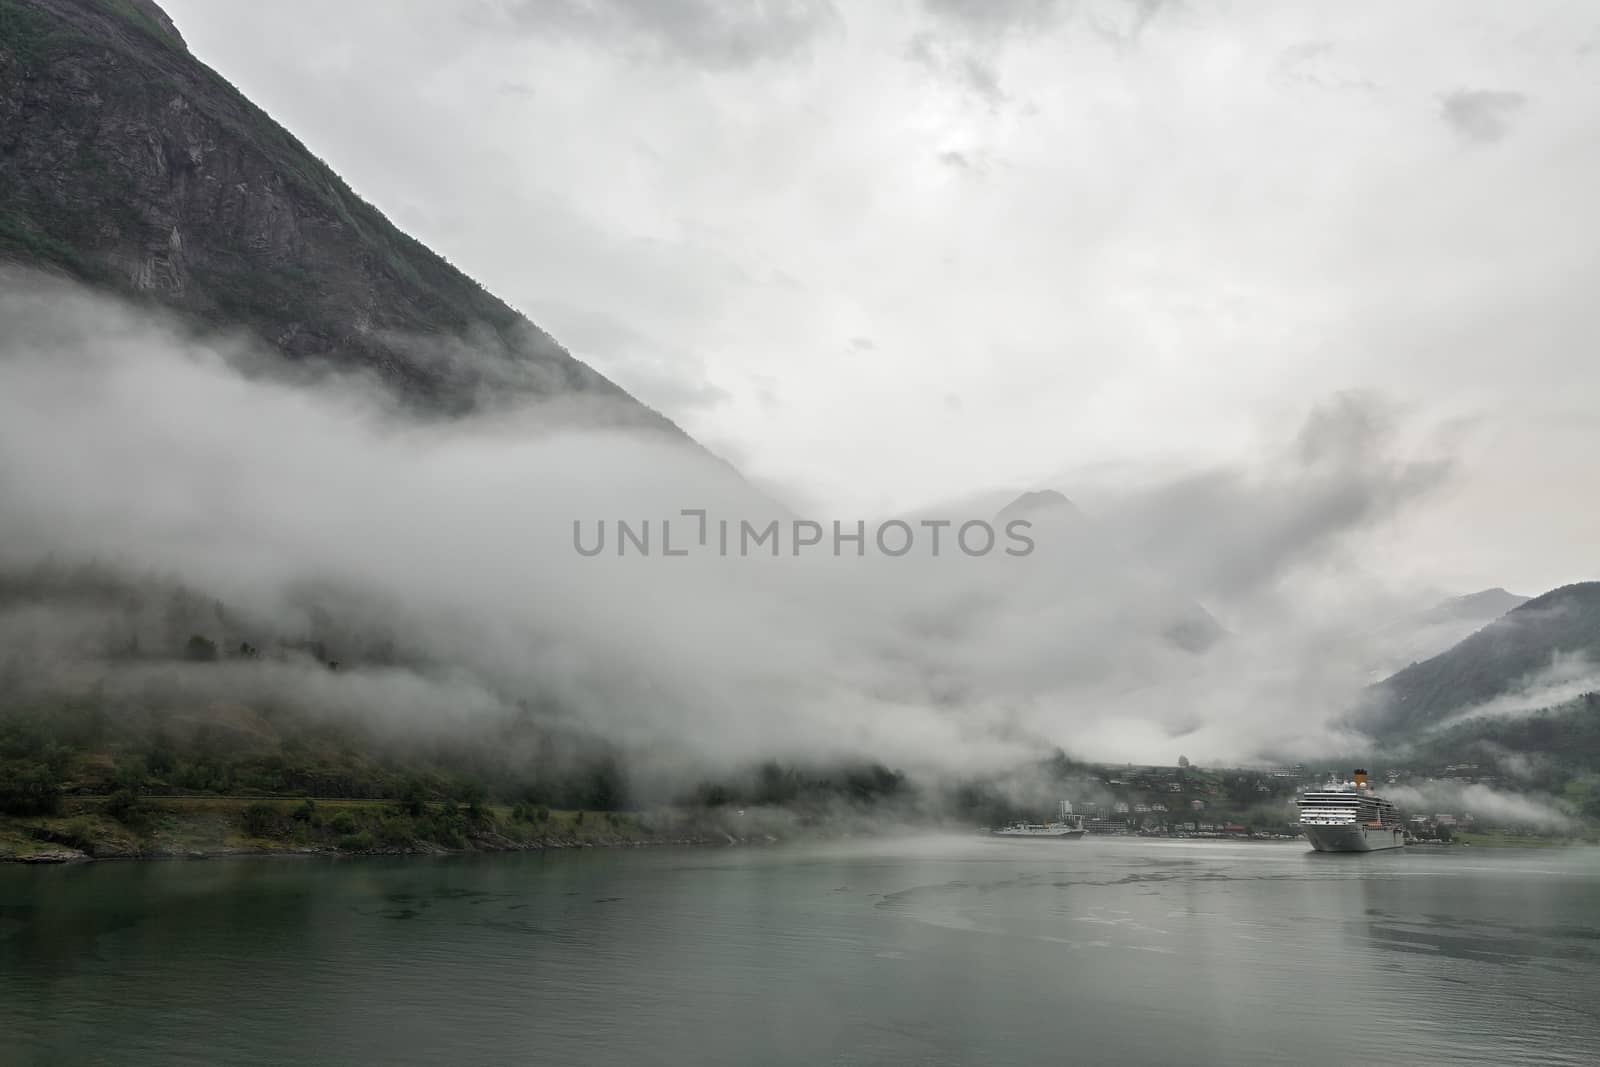 Cruise ship docked in Geiranger in a foggy and cloudy day, Norway